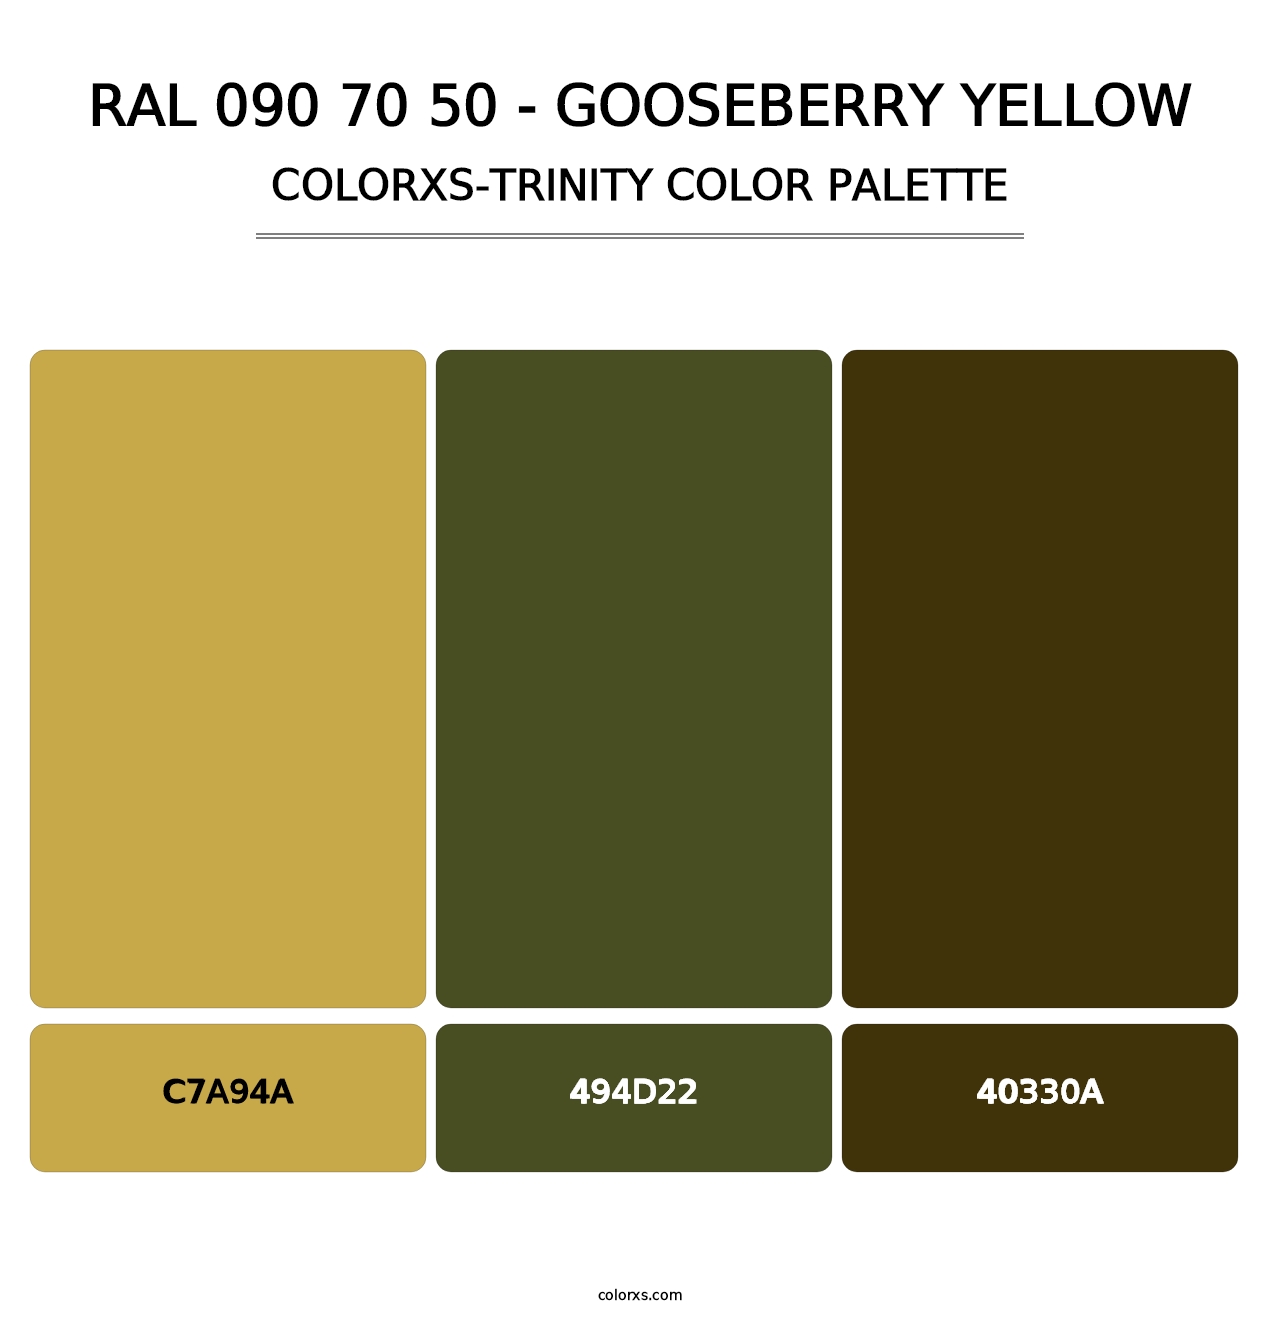 RAL 090 70 50 - Gooseberry Yellow - Colorxs Trinity Palette